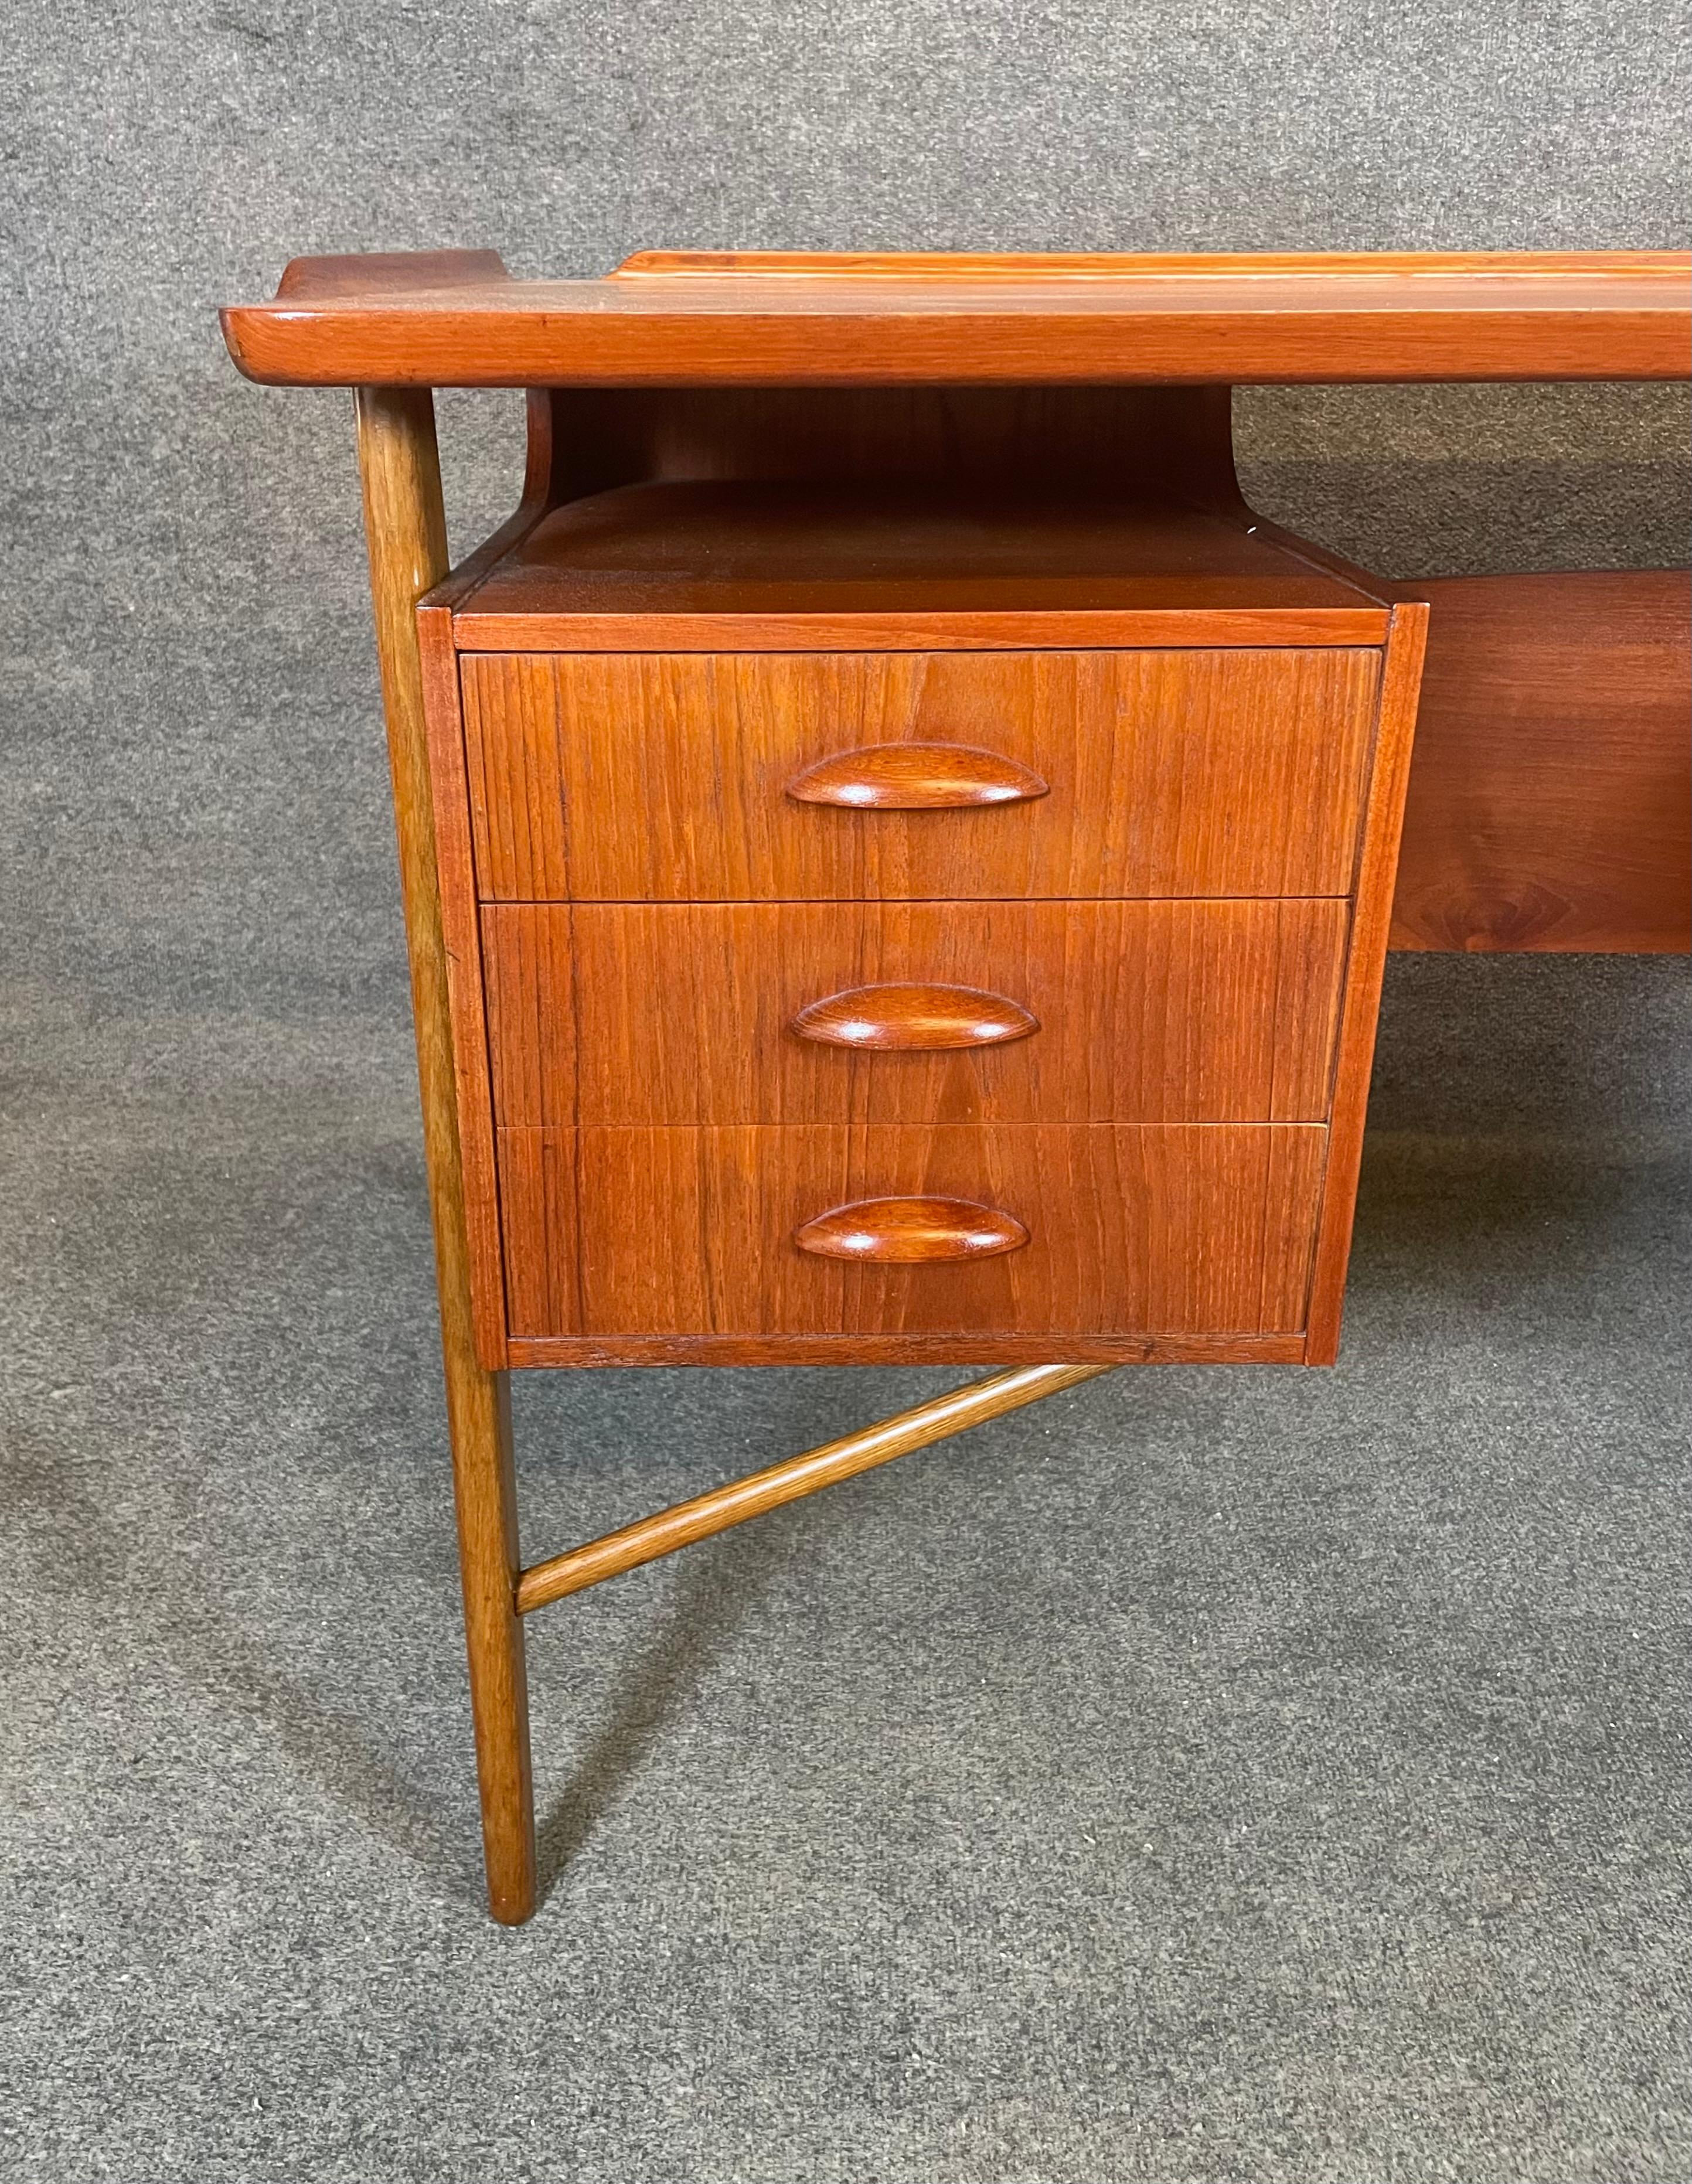 Here is a beautiful scandinavian modern desk in teak manufactured in Denmark in the 1960's and reminiscent of Svend Madsen's design.
This special desk, recently imported from Europe to California before its refinishing, features a vibrant wood